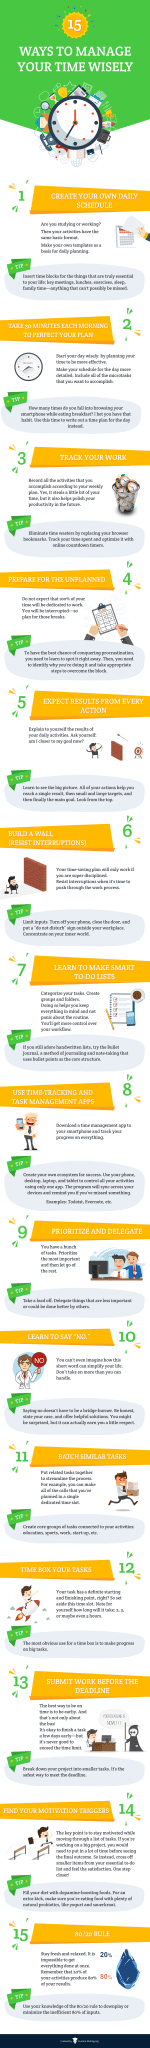 15 Ways to Manage Time infographic